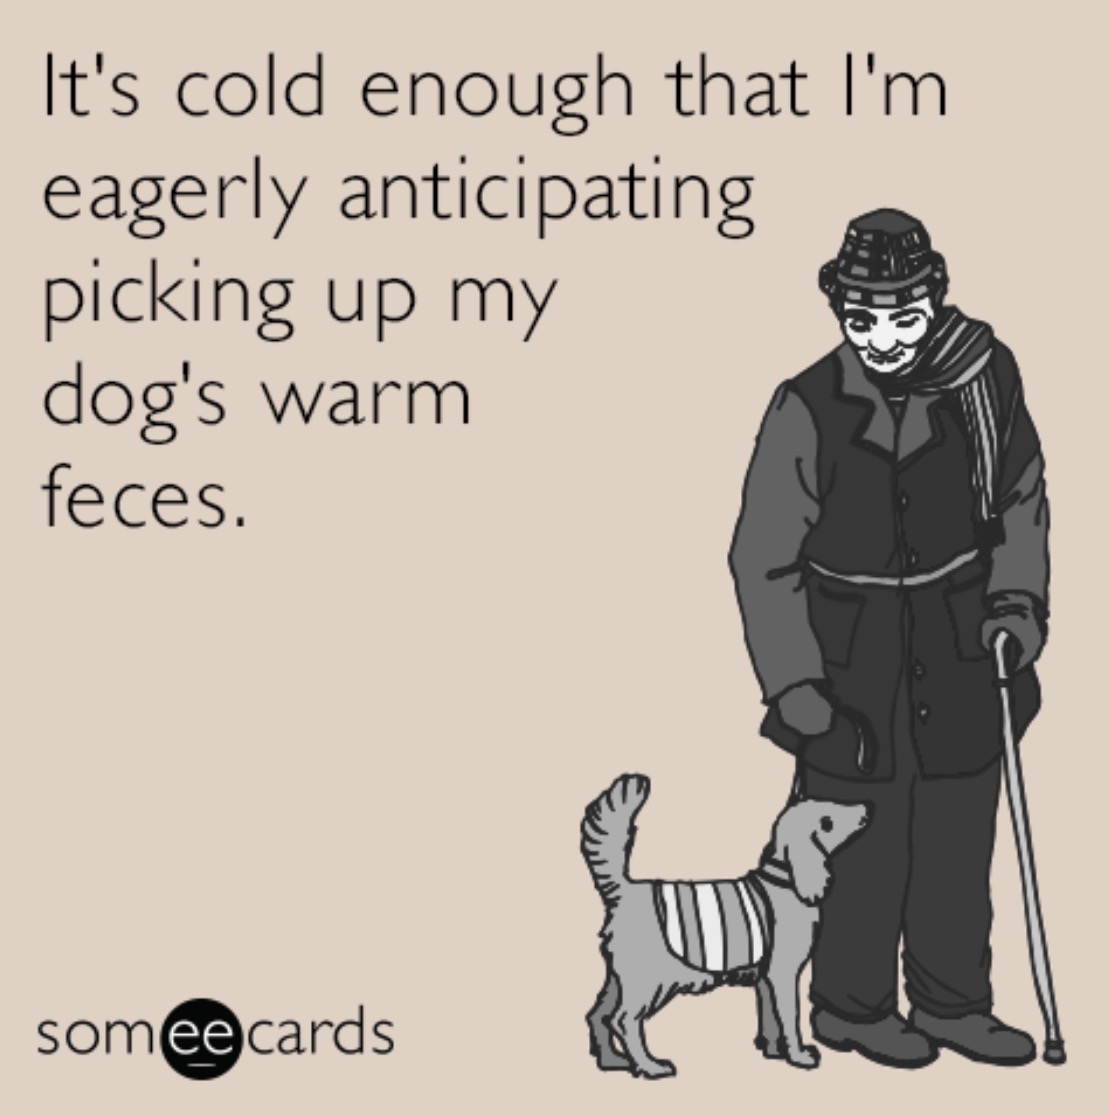 15 Memes To Keep You Warm During The Polar Vortex